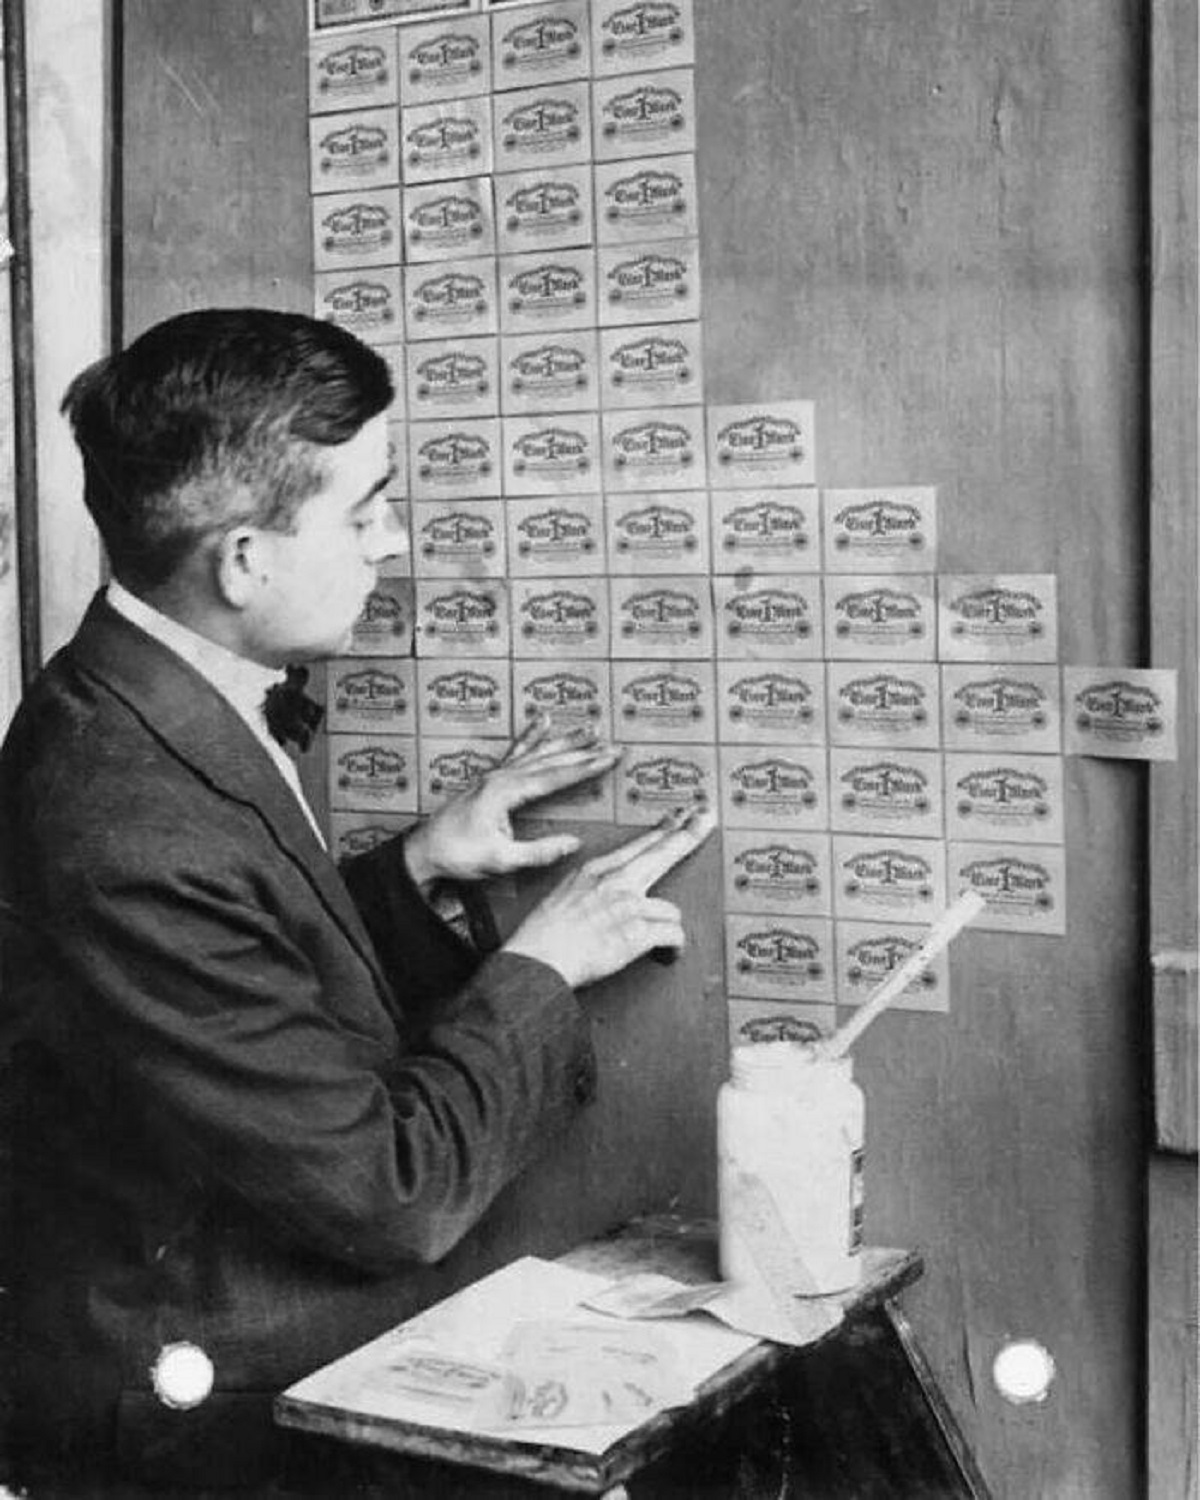 "Germany, 1923: During Hyperinflation, Banknotes Had Lost So Much Value That They Were Used As Wallpaper, Being Much Cheaper Than Actual Wallpaper"